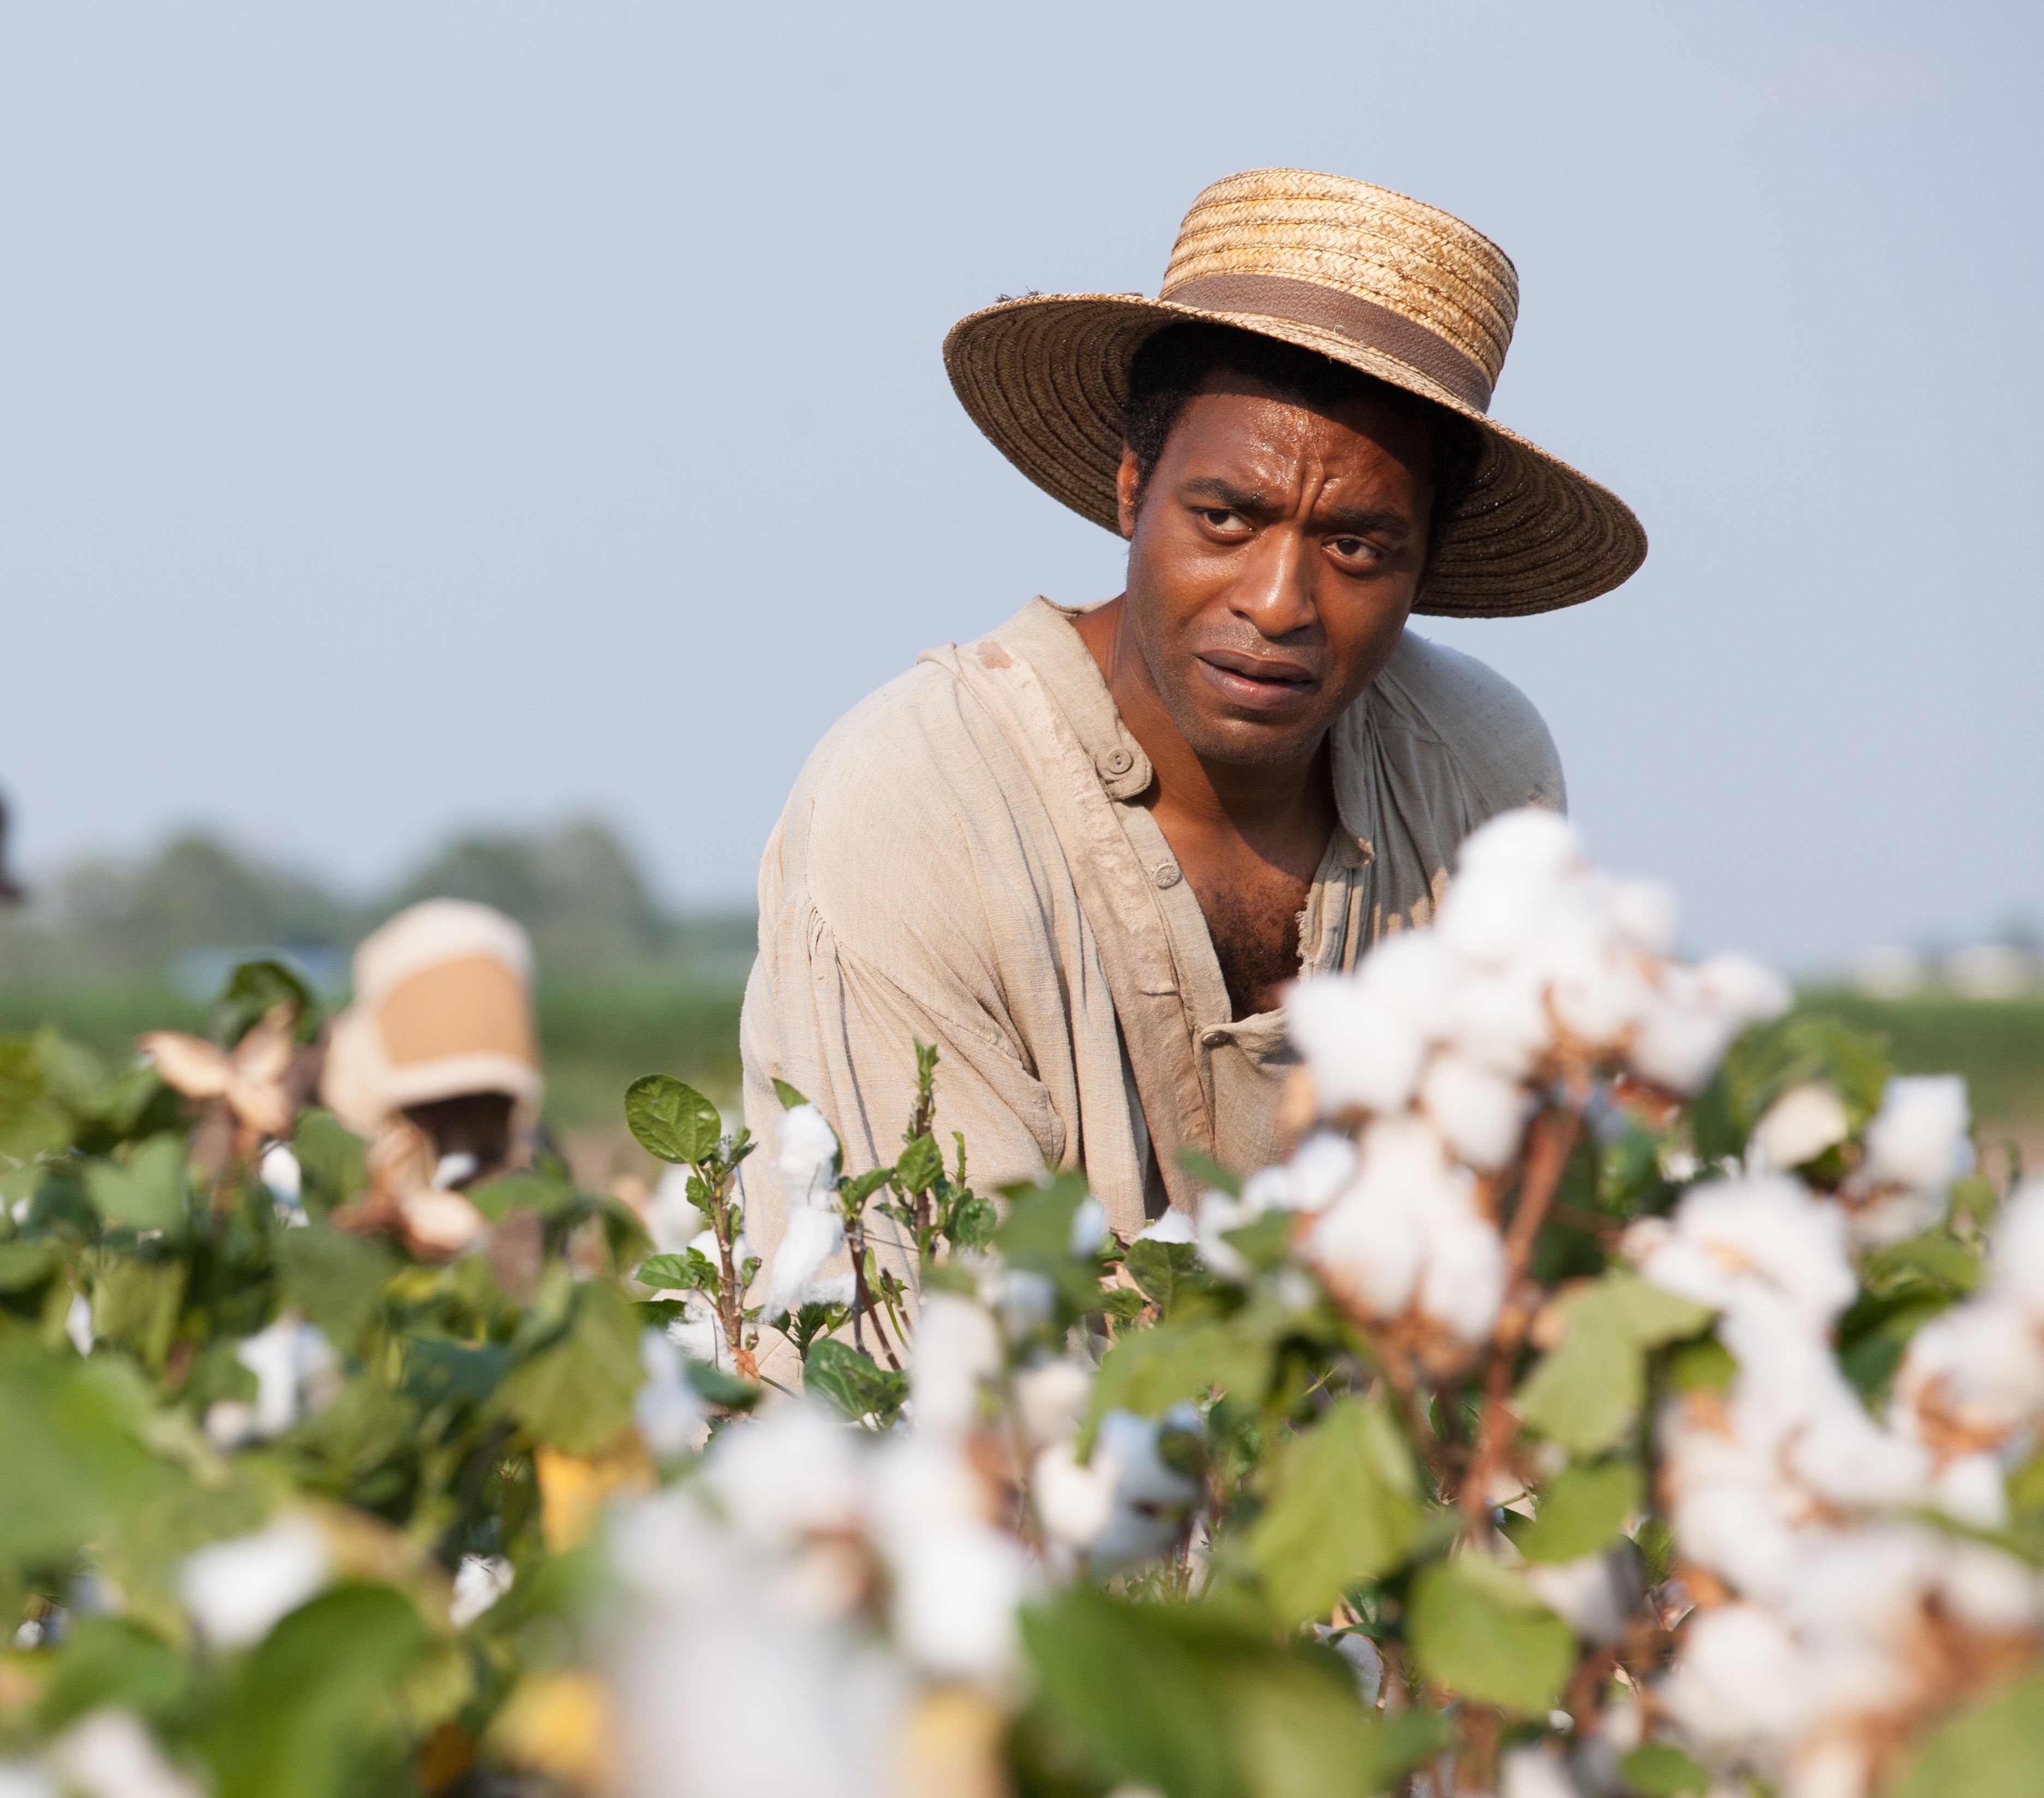 Solomon Northup working on the cotton field